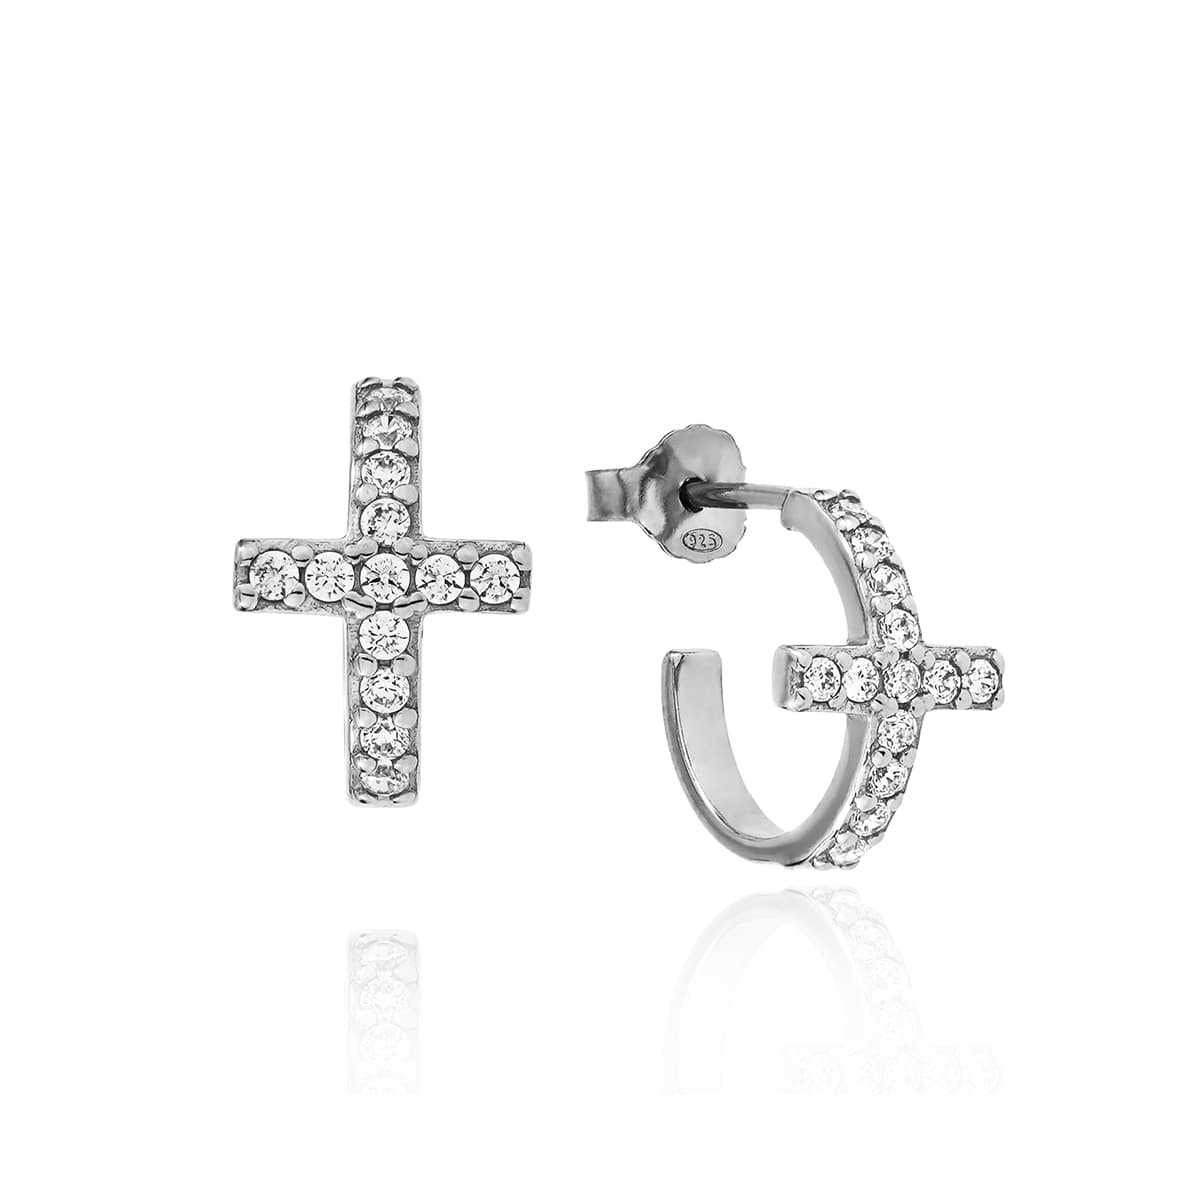 Earrings-silver-925-rhodium-plated-with-zirconia